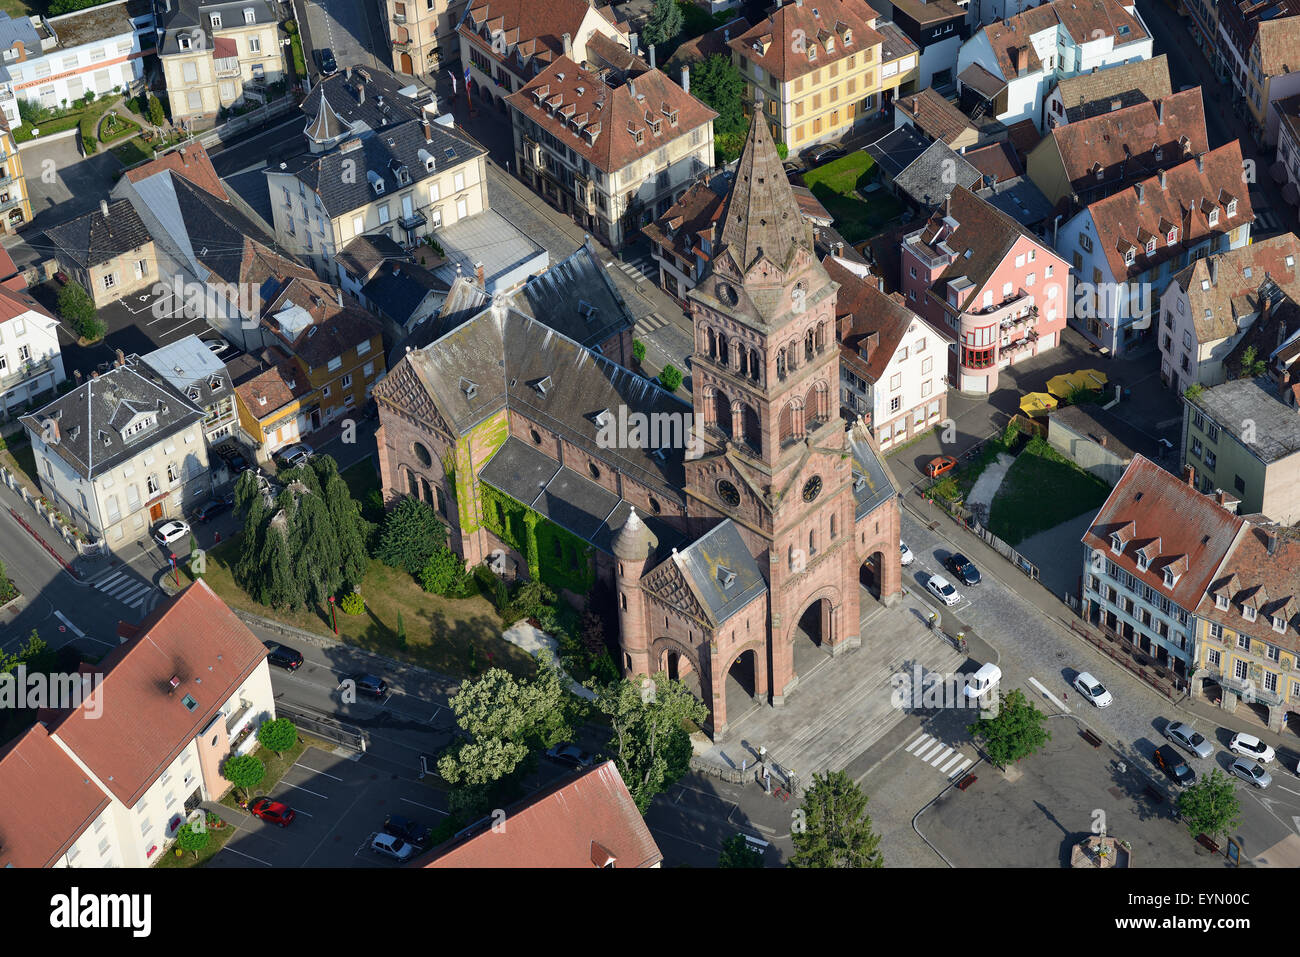 AERIAL VIEW. Protestant Church. Munster, Haut-Rhin, Alsace, Grand Est, France. Stock Photo